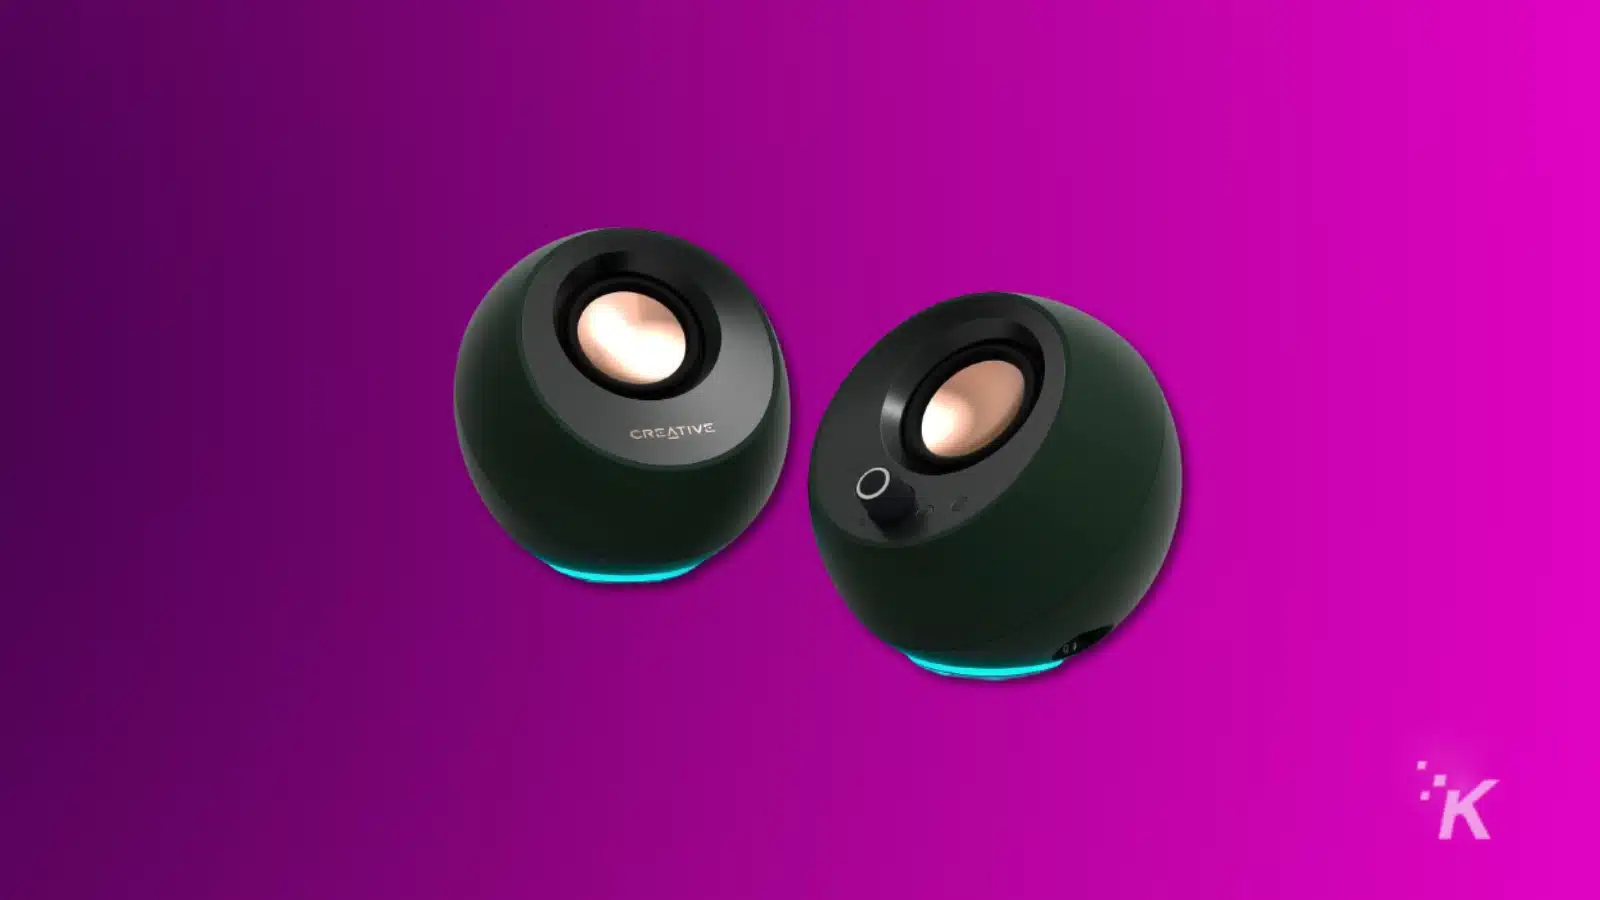 Render of creative pebble pro computer speakers on a purple background